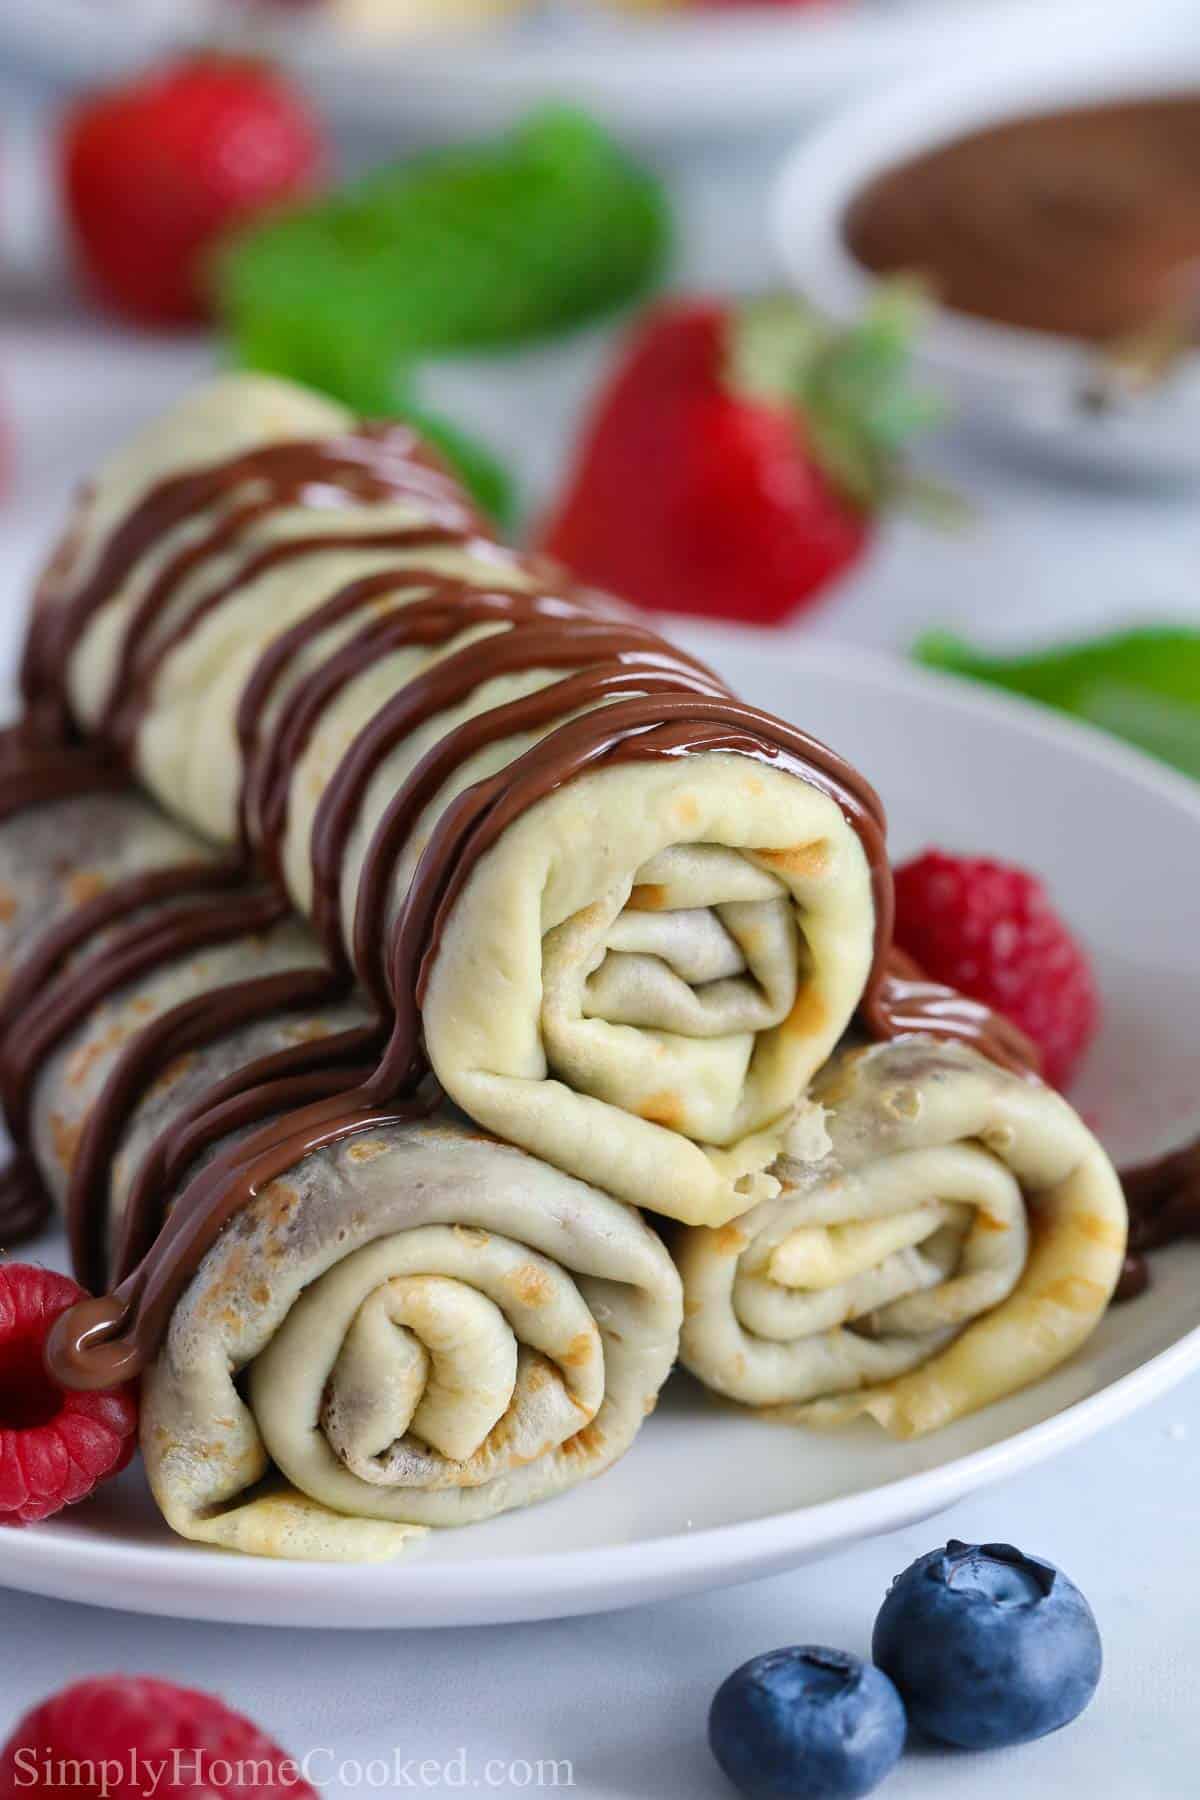 Rolled crepes stacked and drizzled with chocolate sauce